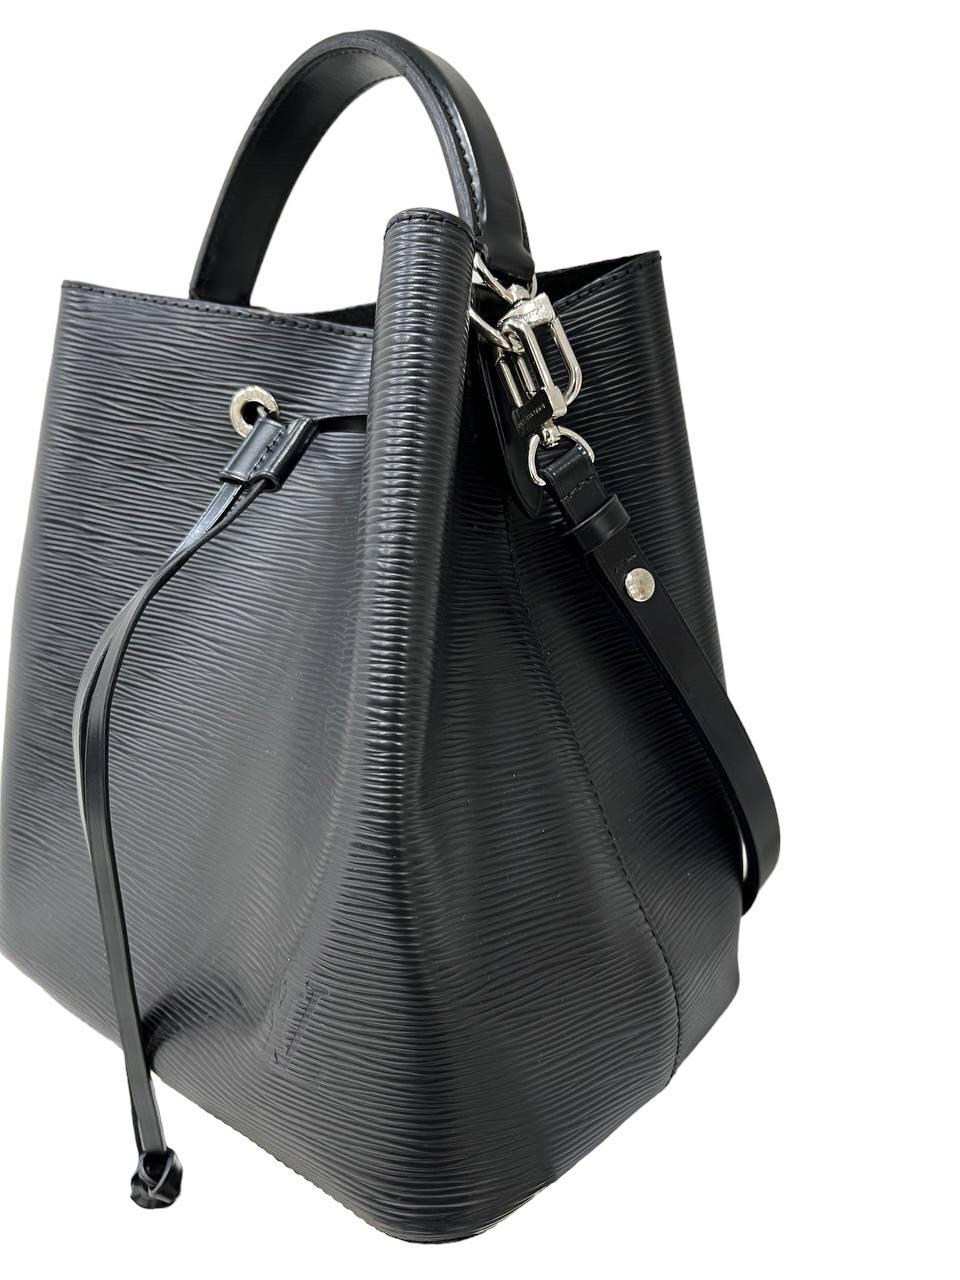 Louis Vuitton bucket bag, NèoNoè model, made in black epi leather with smooth cowhide trim and silver hardware. Equipped with a removable top handle and an adjustable shoulder strap, which allow the bag to be carried both by hand and on the